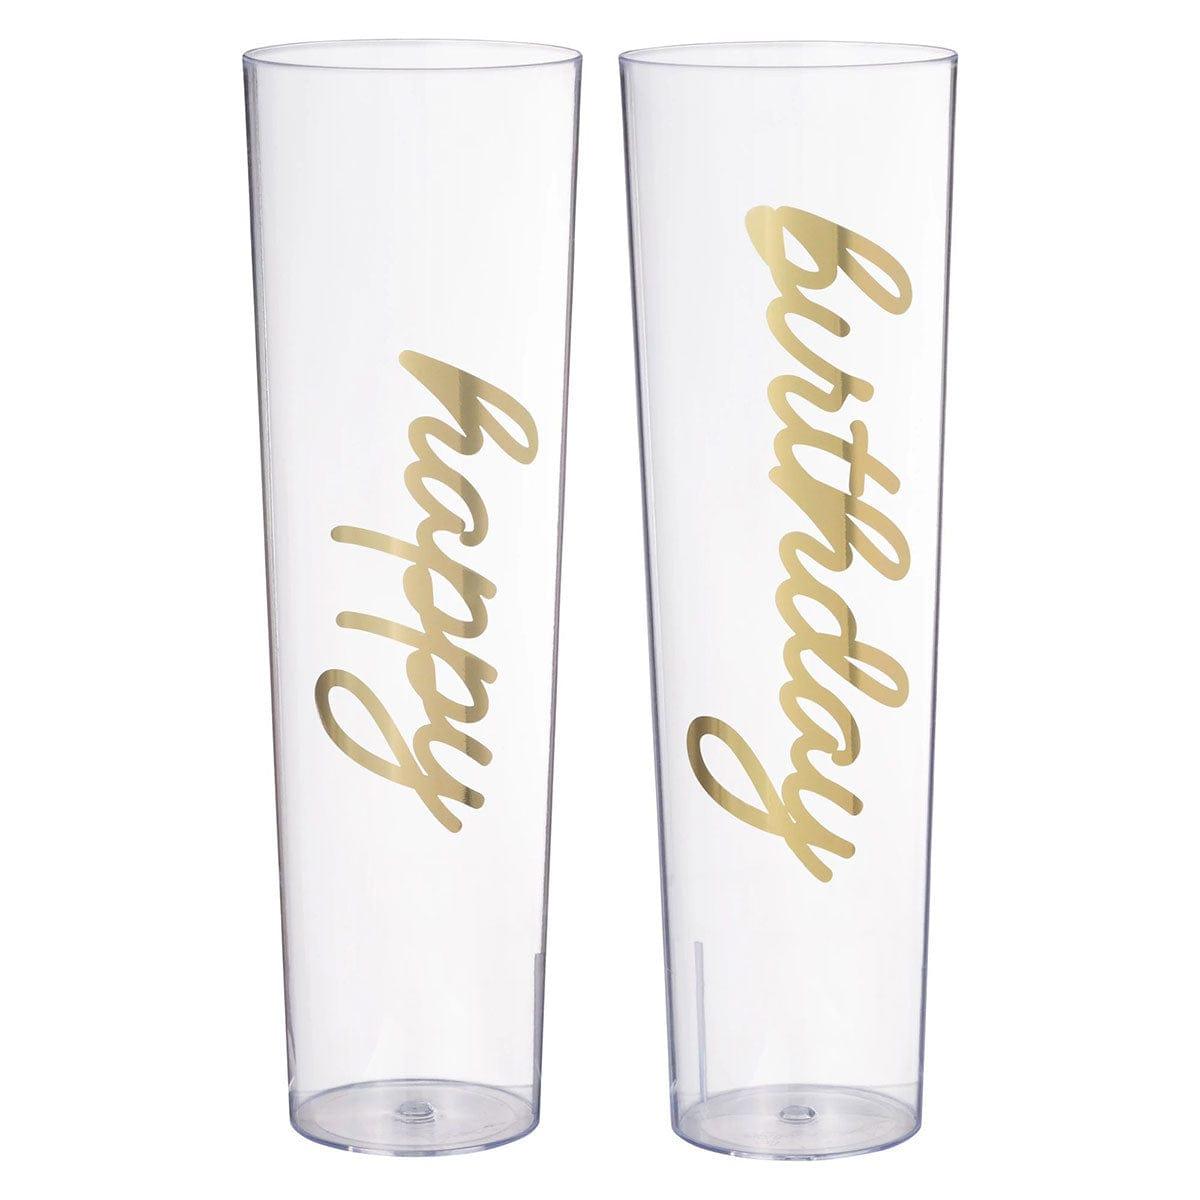 AMSCAN CA Age Specific Birthday Golden Age Birthday, "Happy Birthday" Stemless Champagne Glasses, Plastic, 2 Count